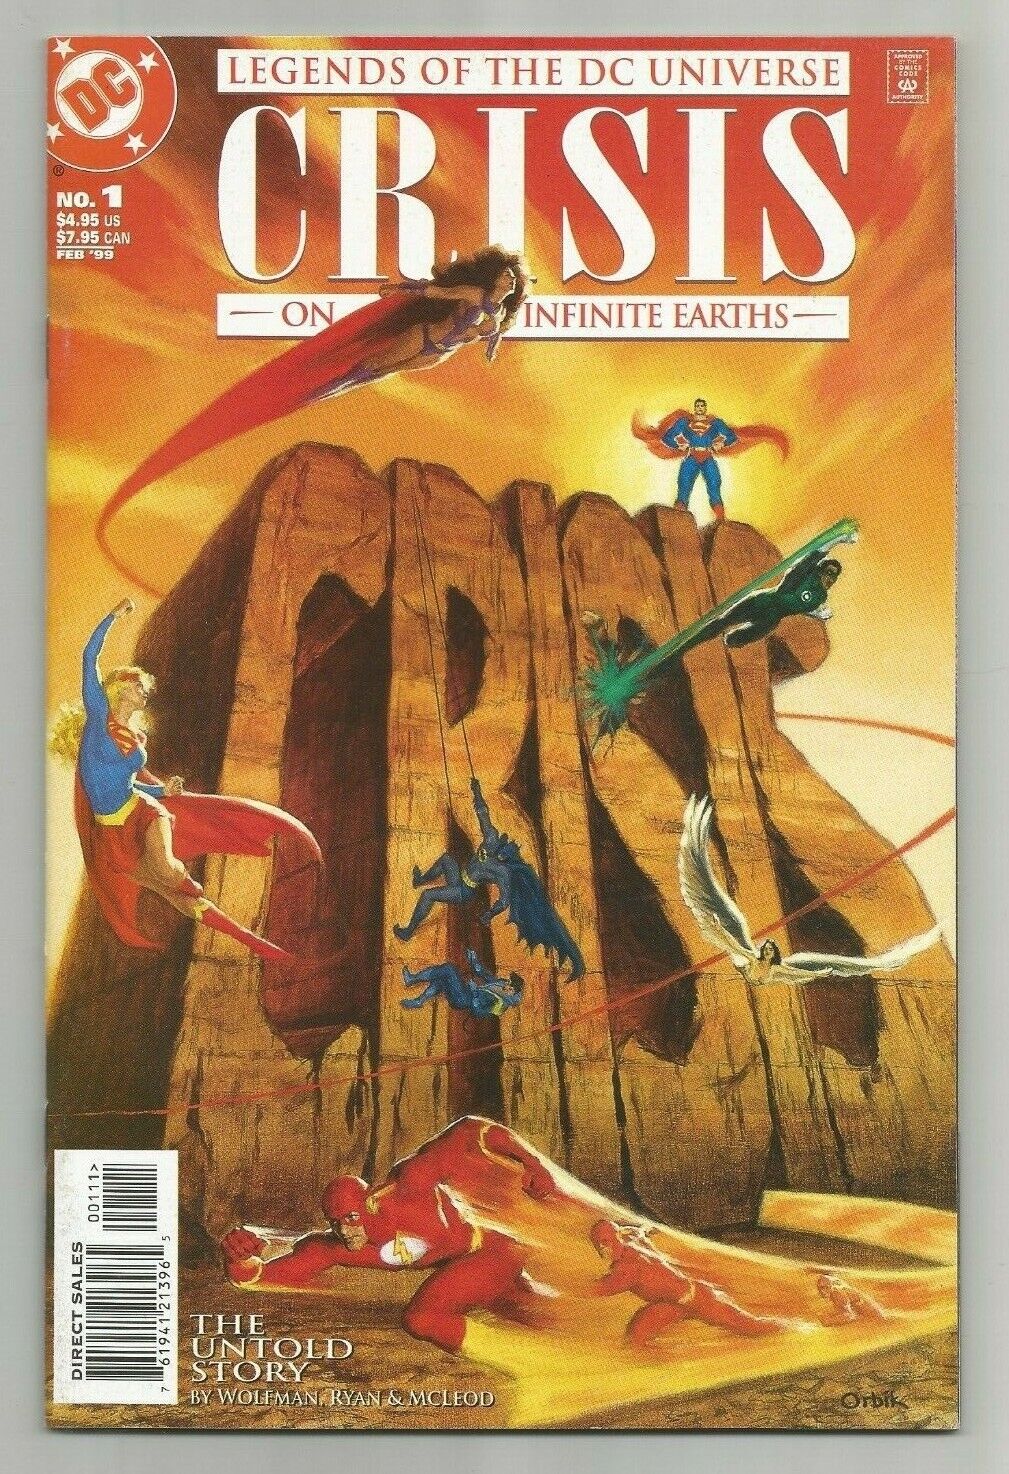 LEGENDS OF THE DC UNIVERSE: CRISIS ON INFINITE EARTHS #1 ~ VF 1999 COMIC 1ST APP